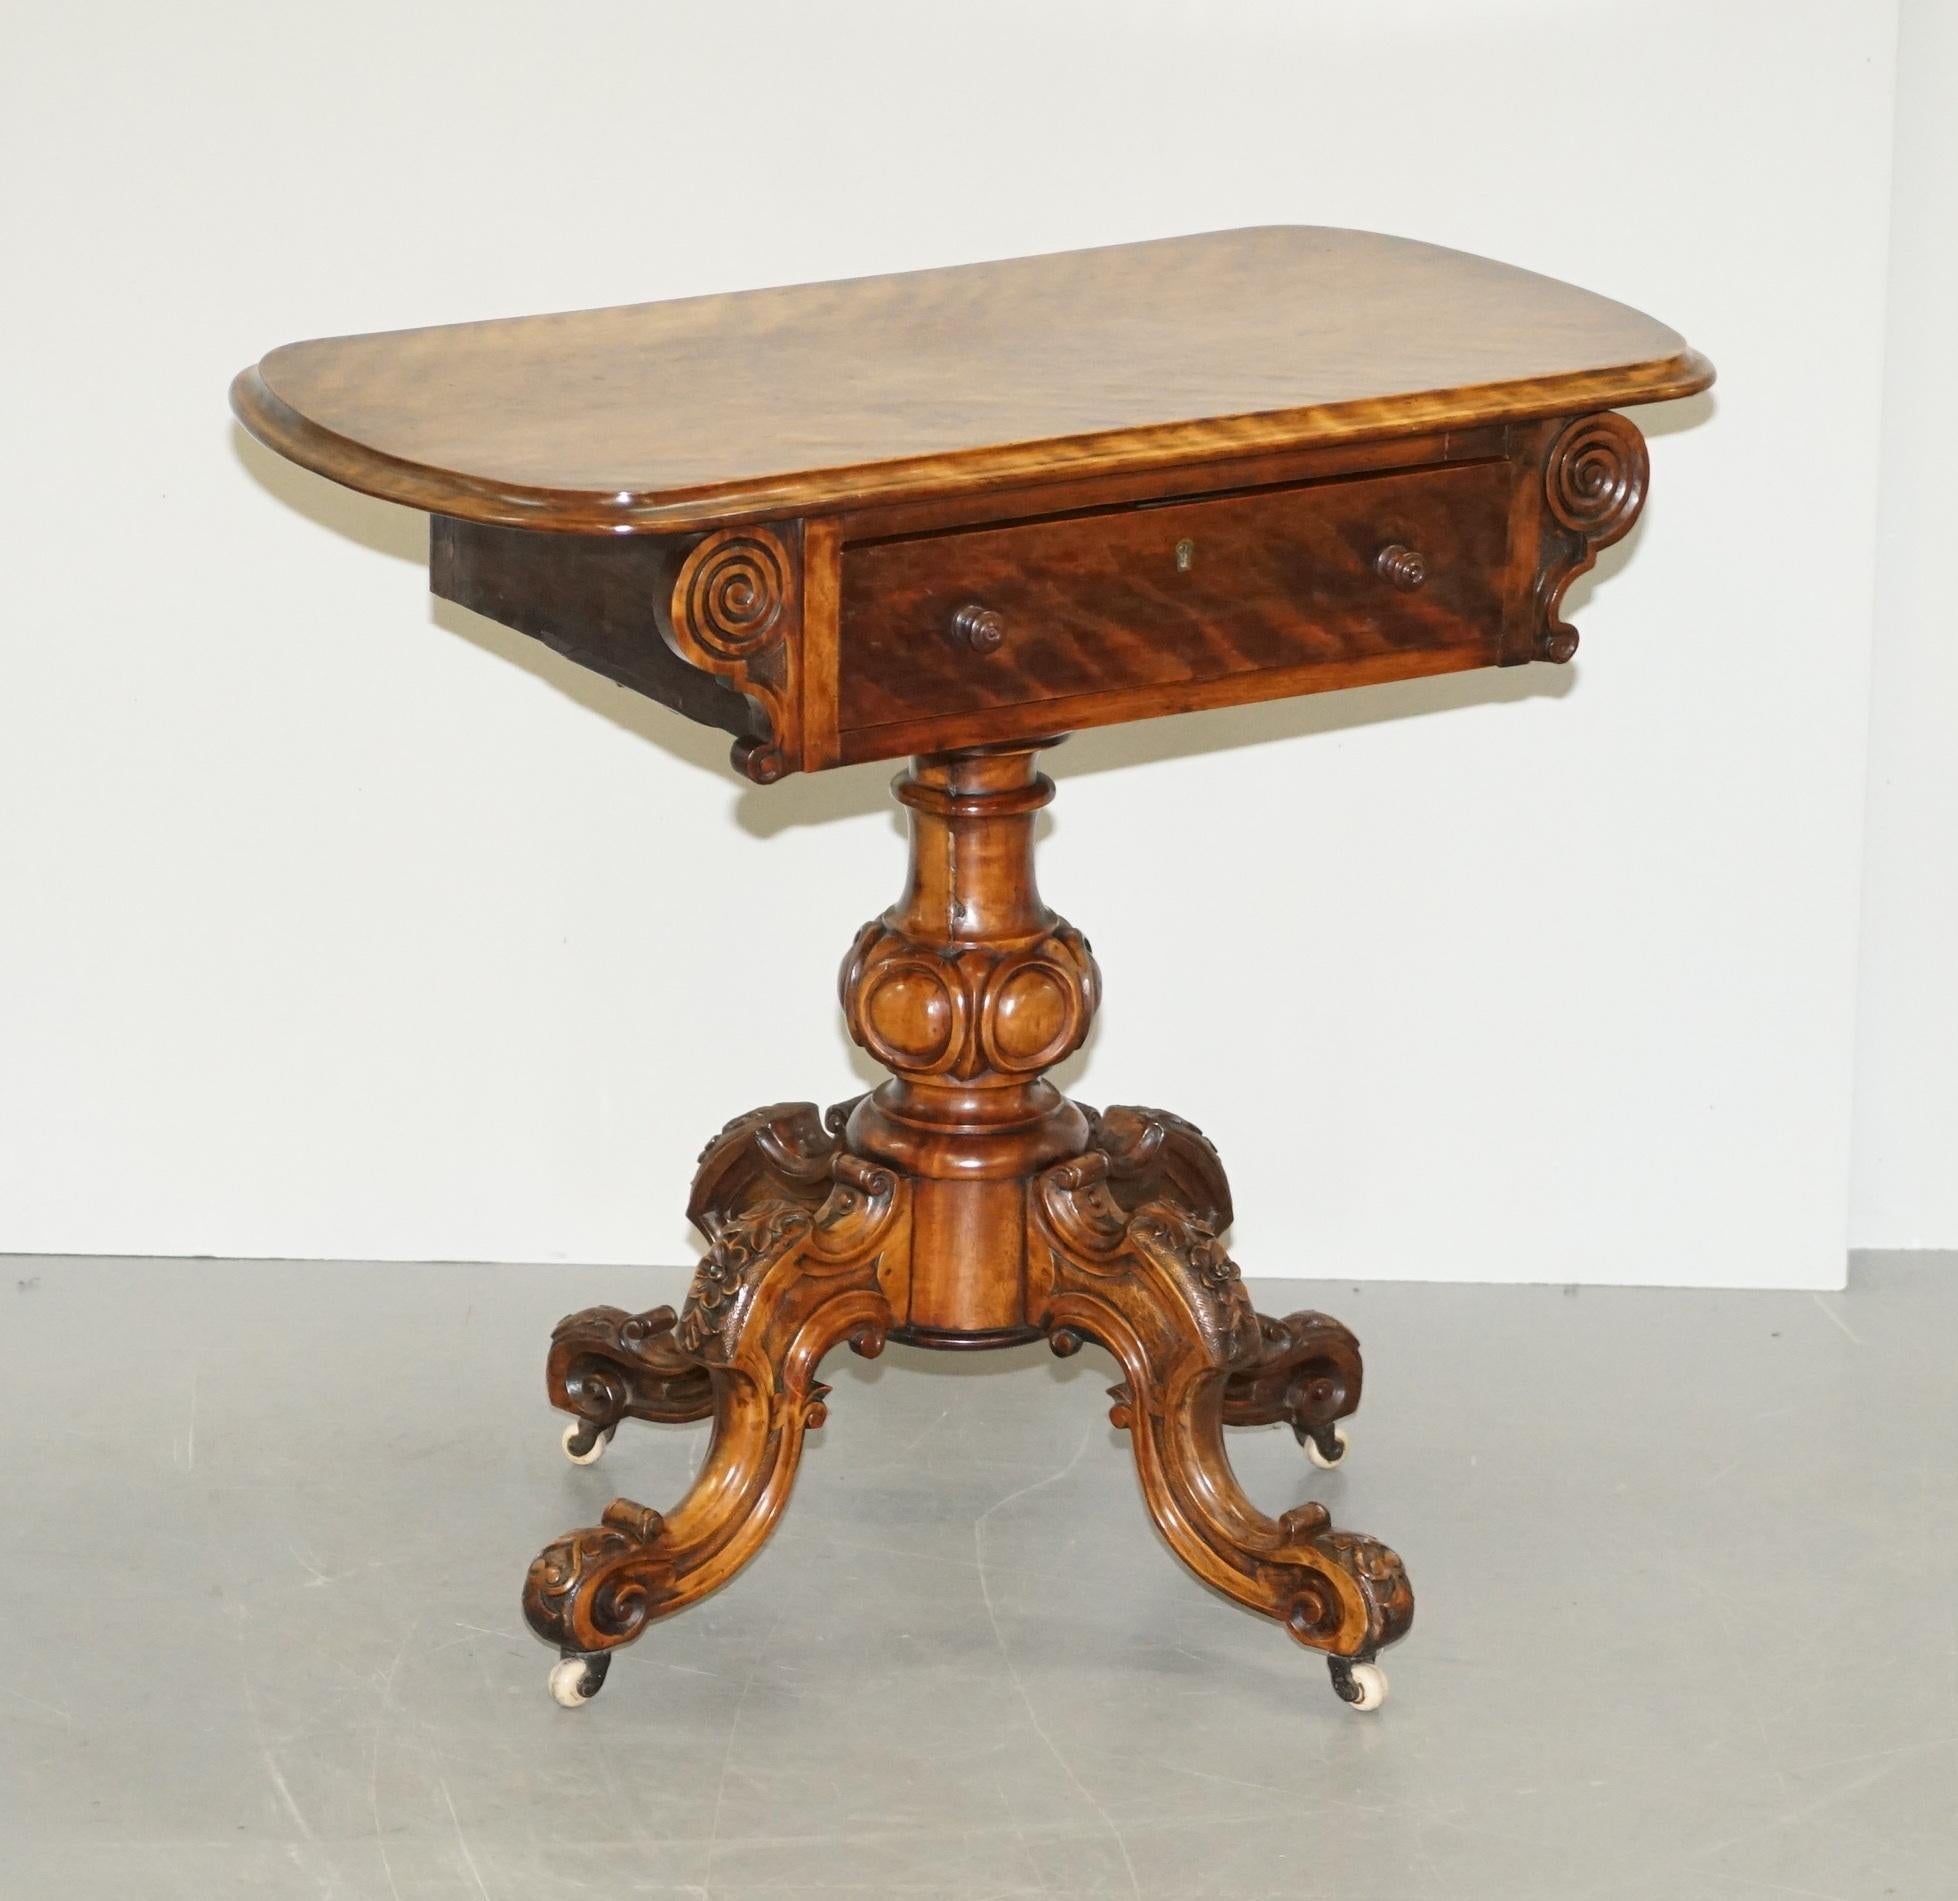 We are delighted to offer for sale this absolutely glorious Victorian Walnut side end table with a heavily carved base 

A good solid table, dating to circa 1860, the pillared base follows with heavily carved legs which look sublime from every